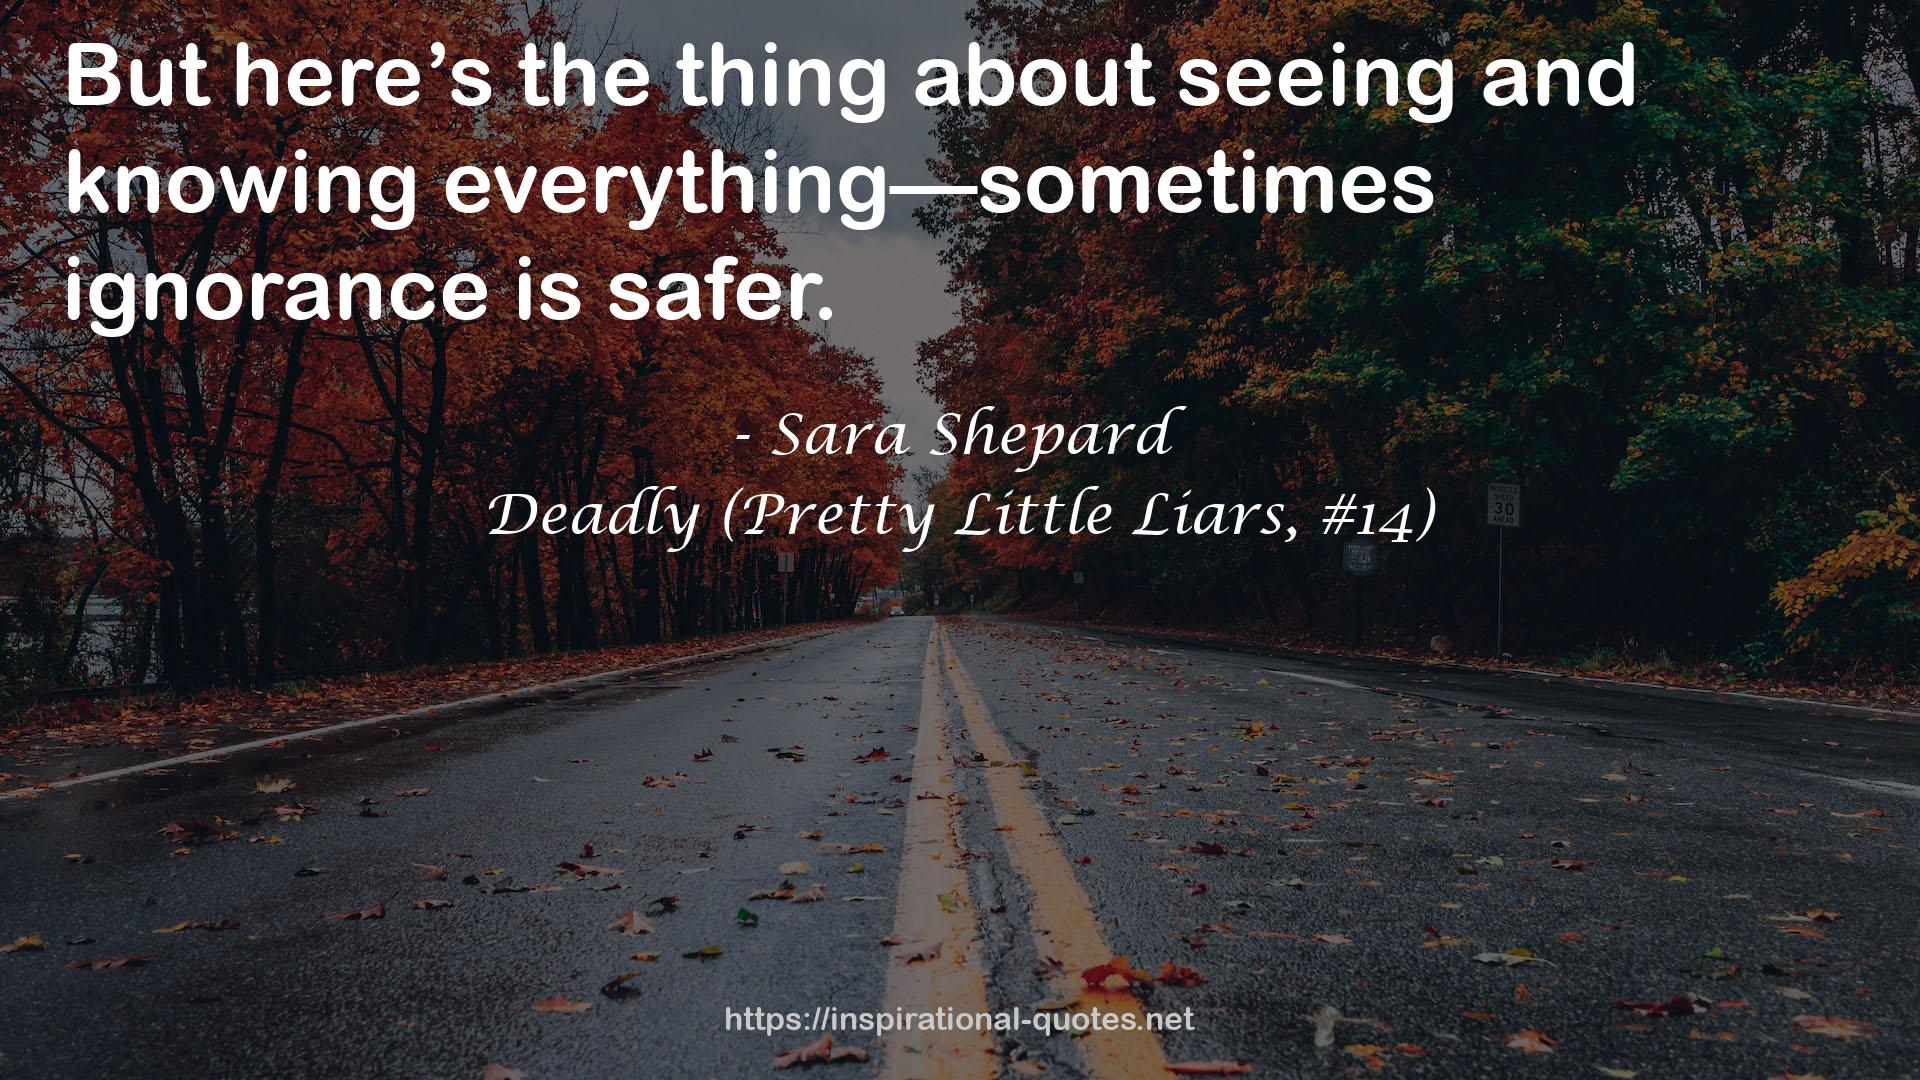 Deadly (Pretty Little Liars, #14) QUOTES